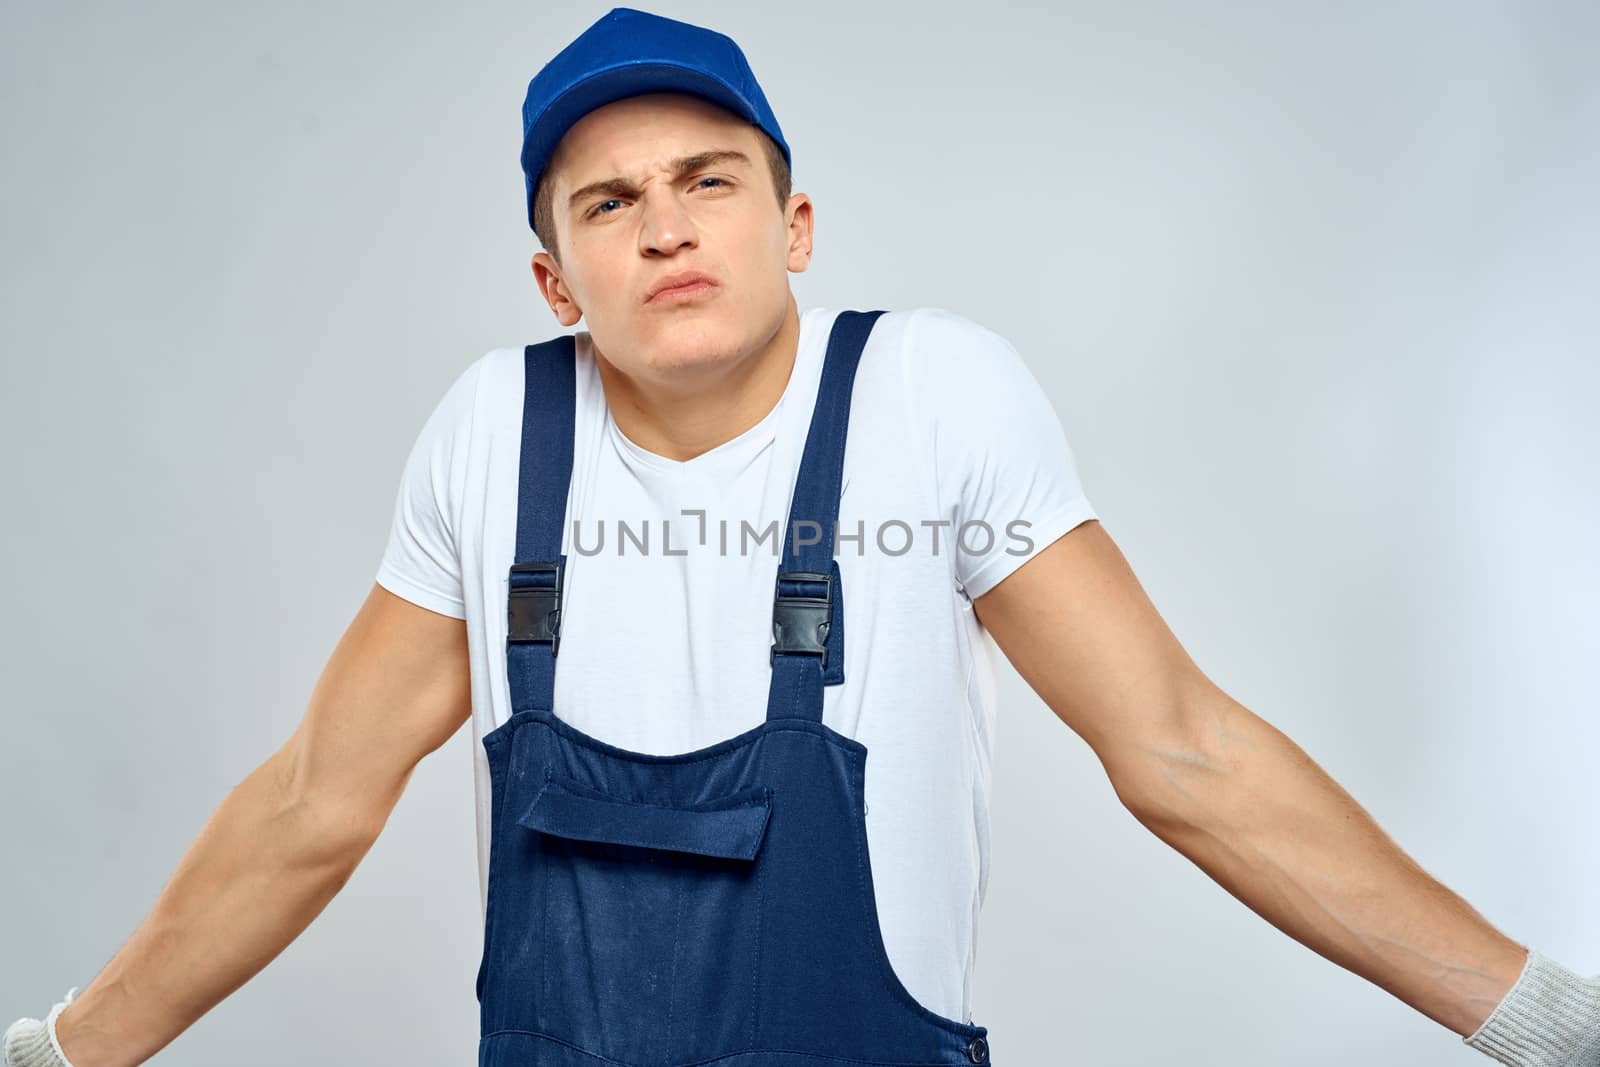 Man worker in forklift uniform delivery service light background. High quality photo